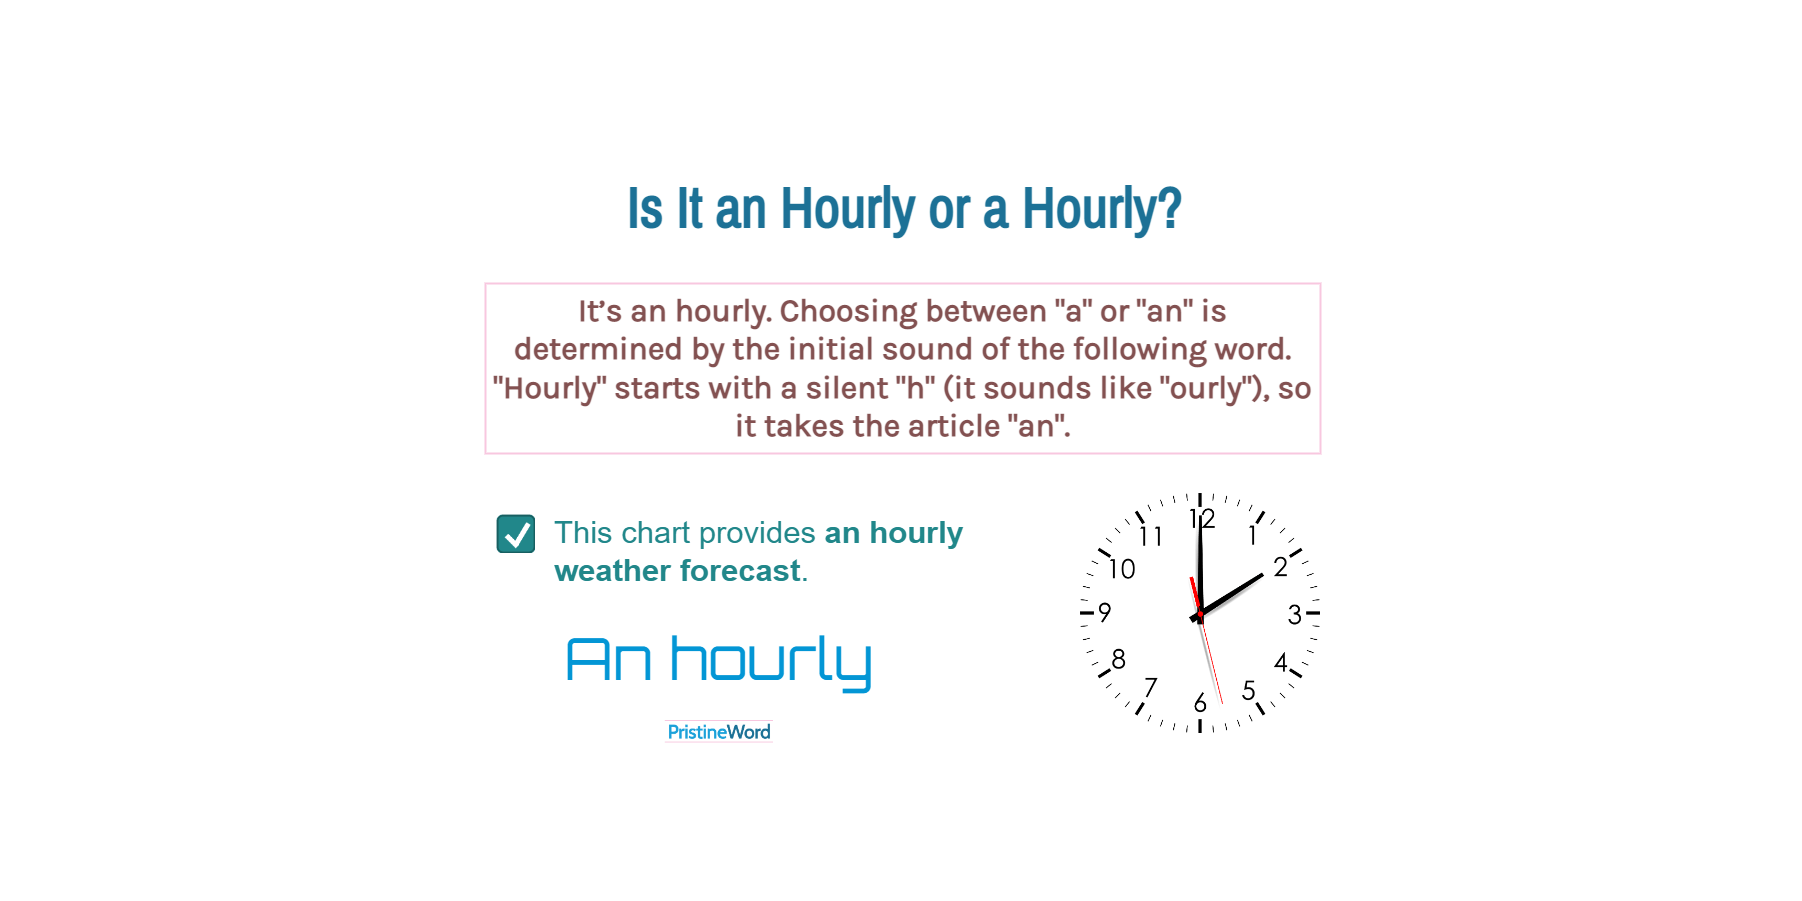 Is It an Hourly or a Hourly?